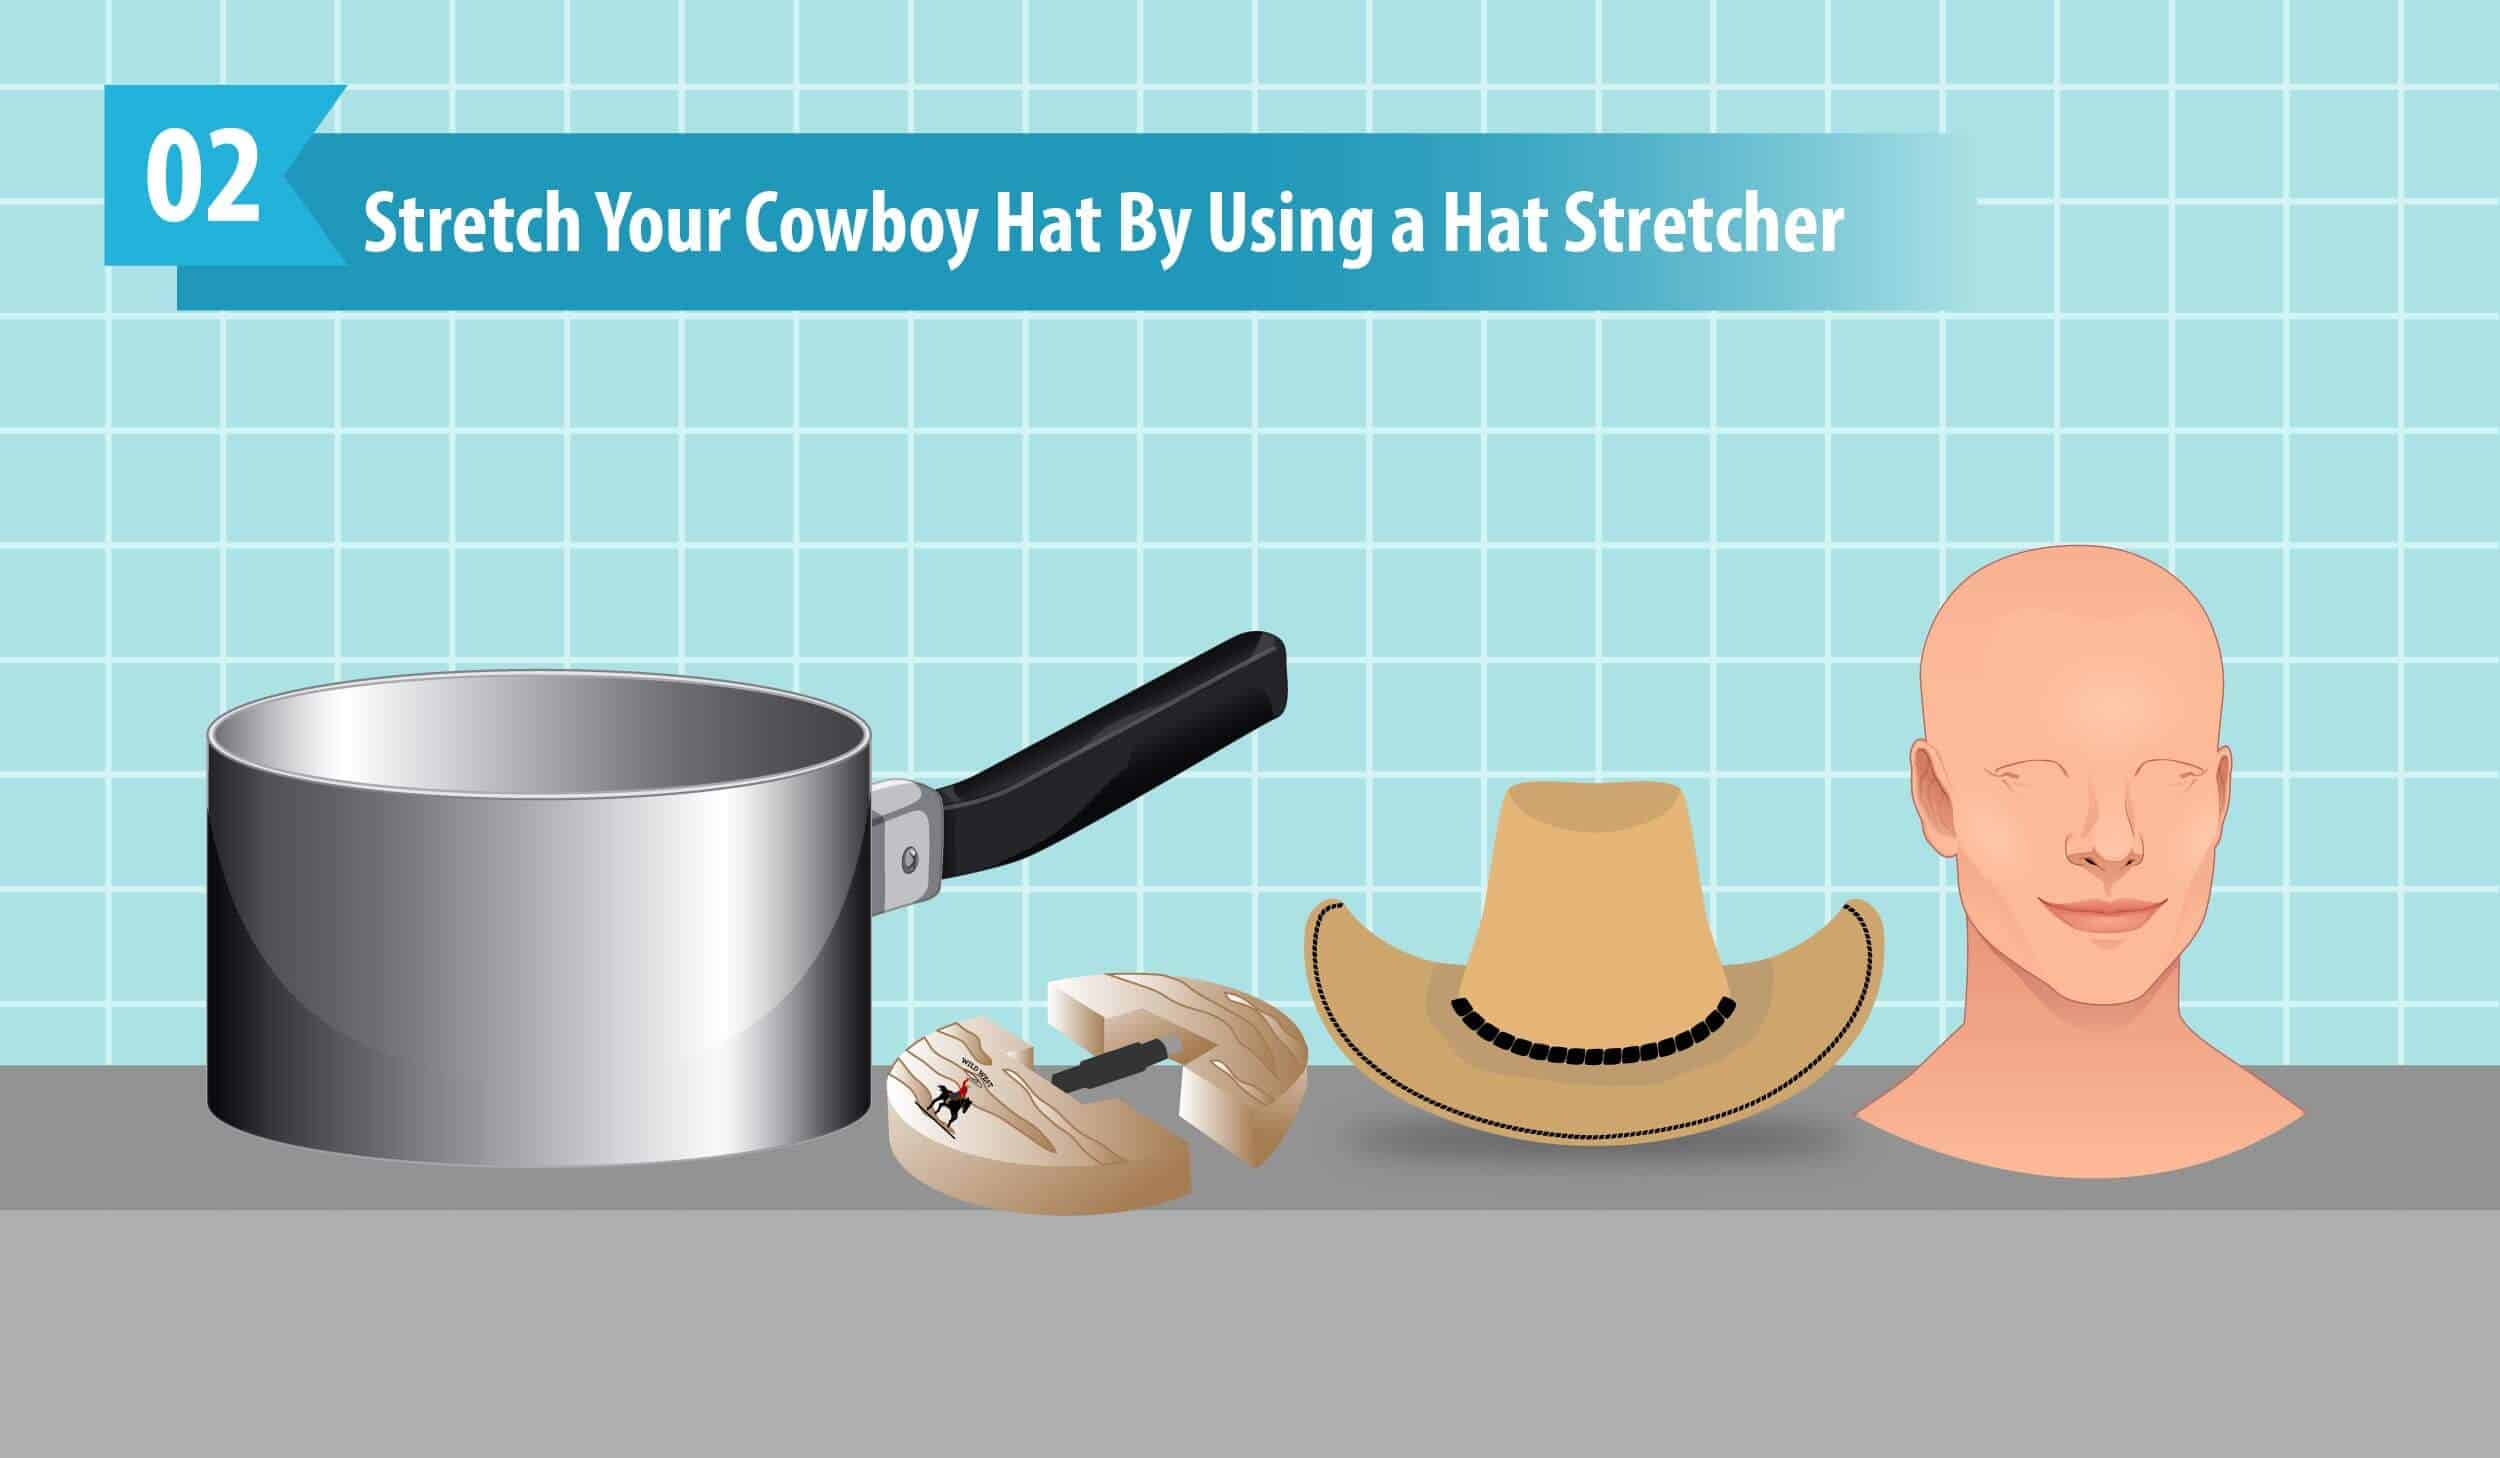 Stretch Your Cowboy Hat By Using a Hat Stretcher